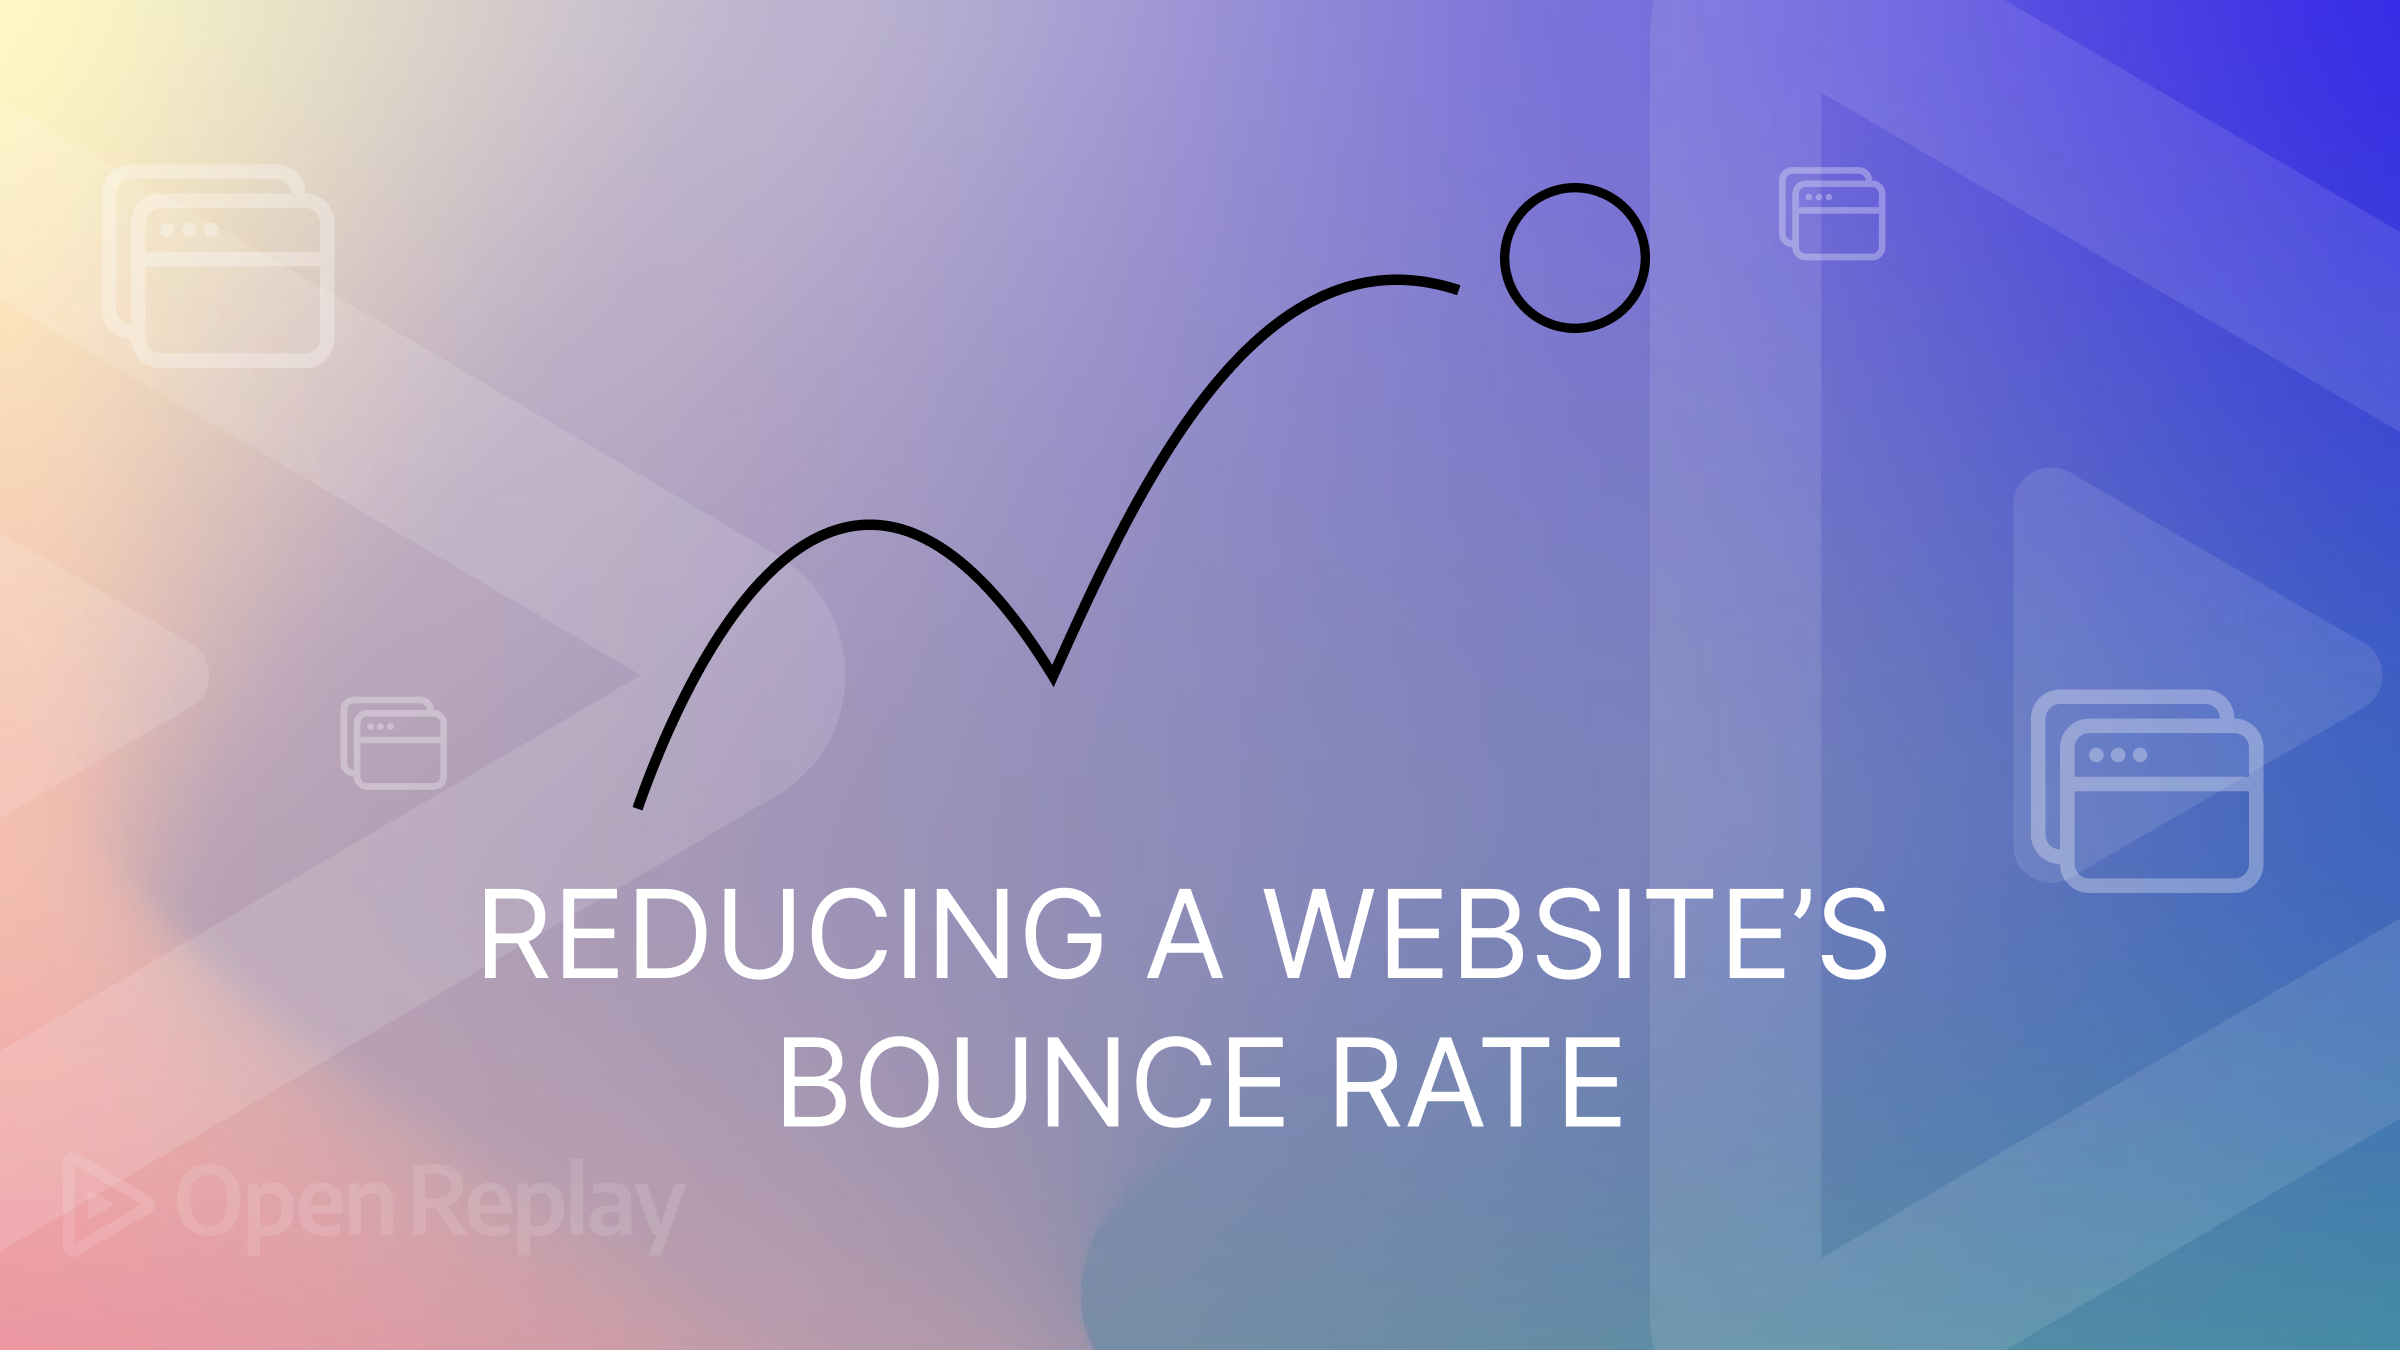 How to reduce your website's bounce rate